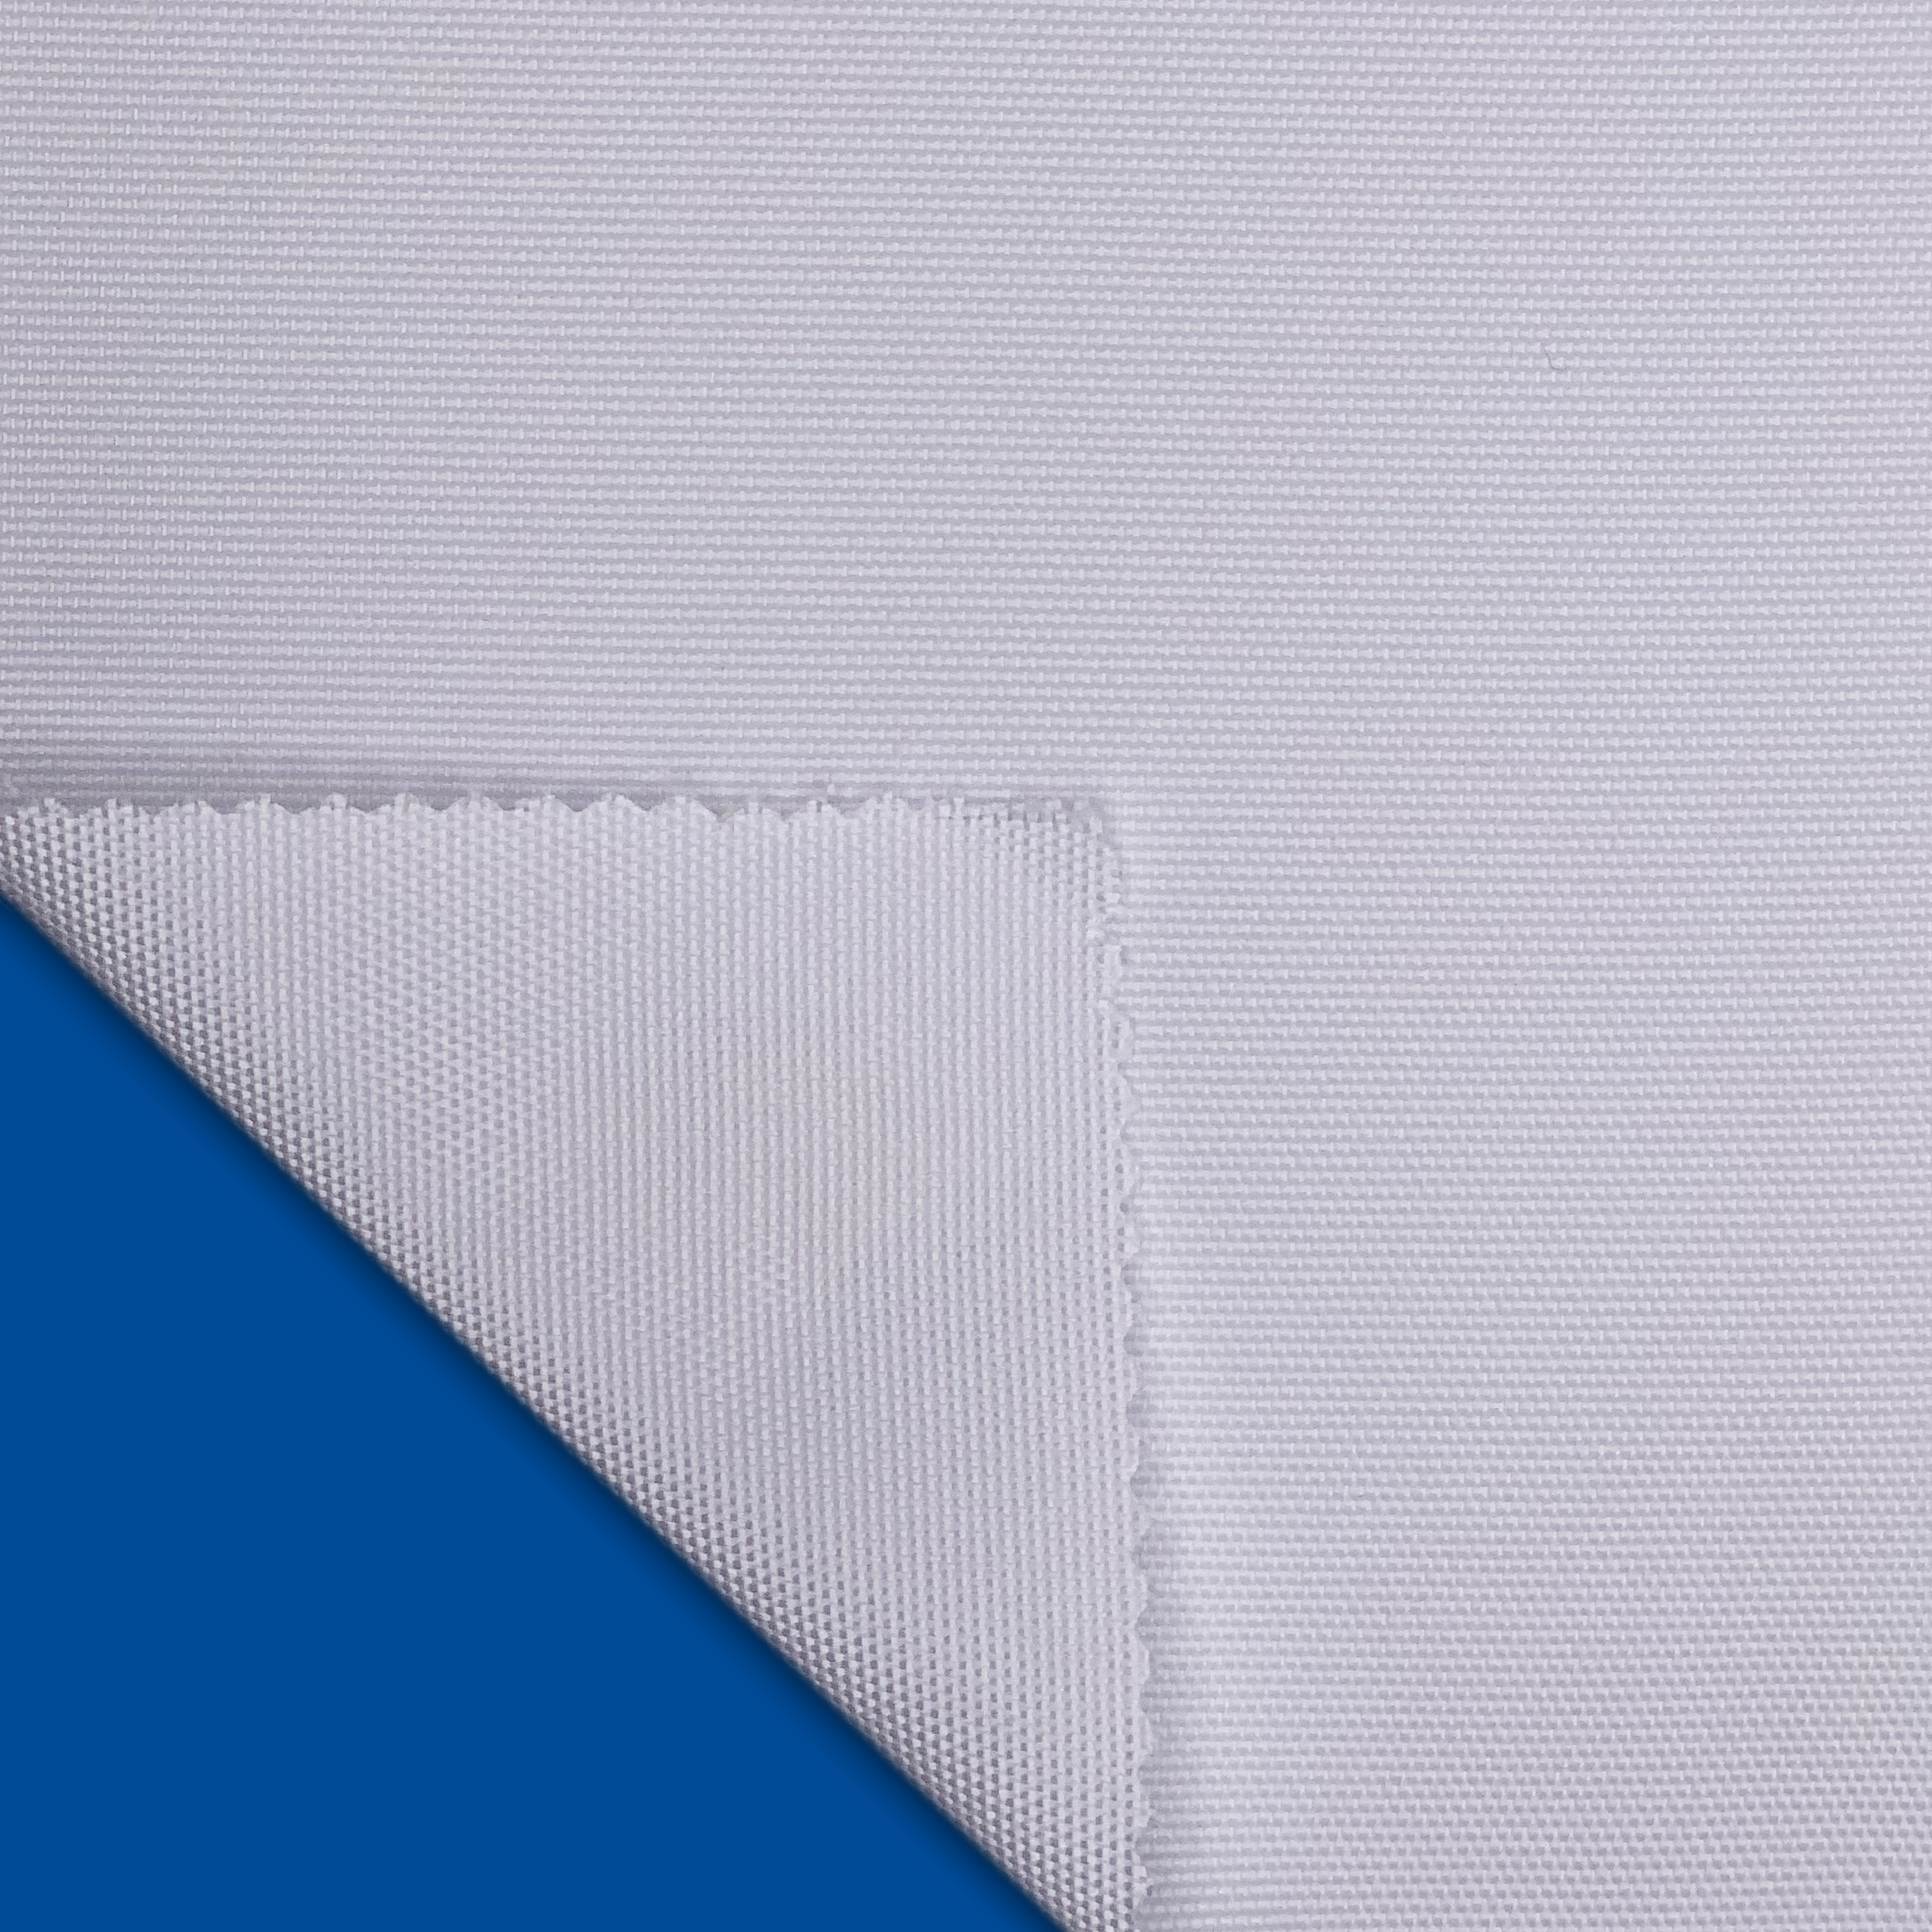 100% Recycled (p/cd300d+p300d)*p300d Polyester Dobby Bag Fabric $1.8 -  Wholesale Taiwan Fabric at Factory Prices from Yaw Liamy Enterprise Co. Ltd  | Globalsources.com